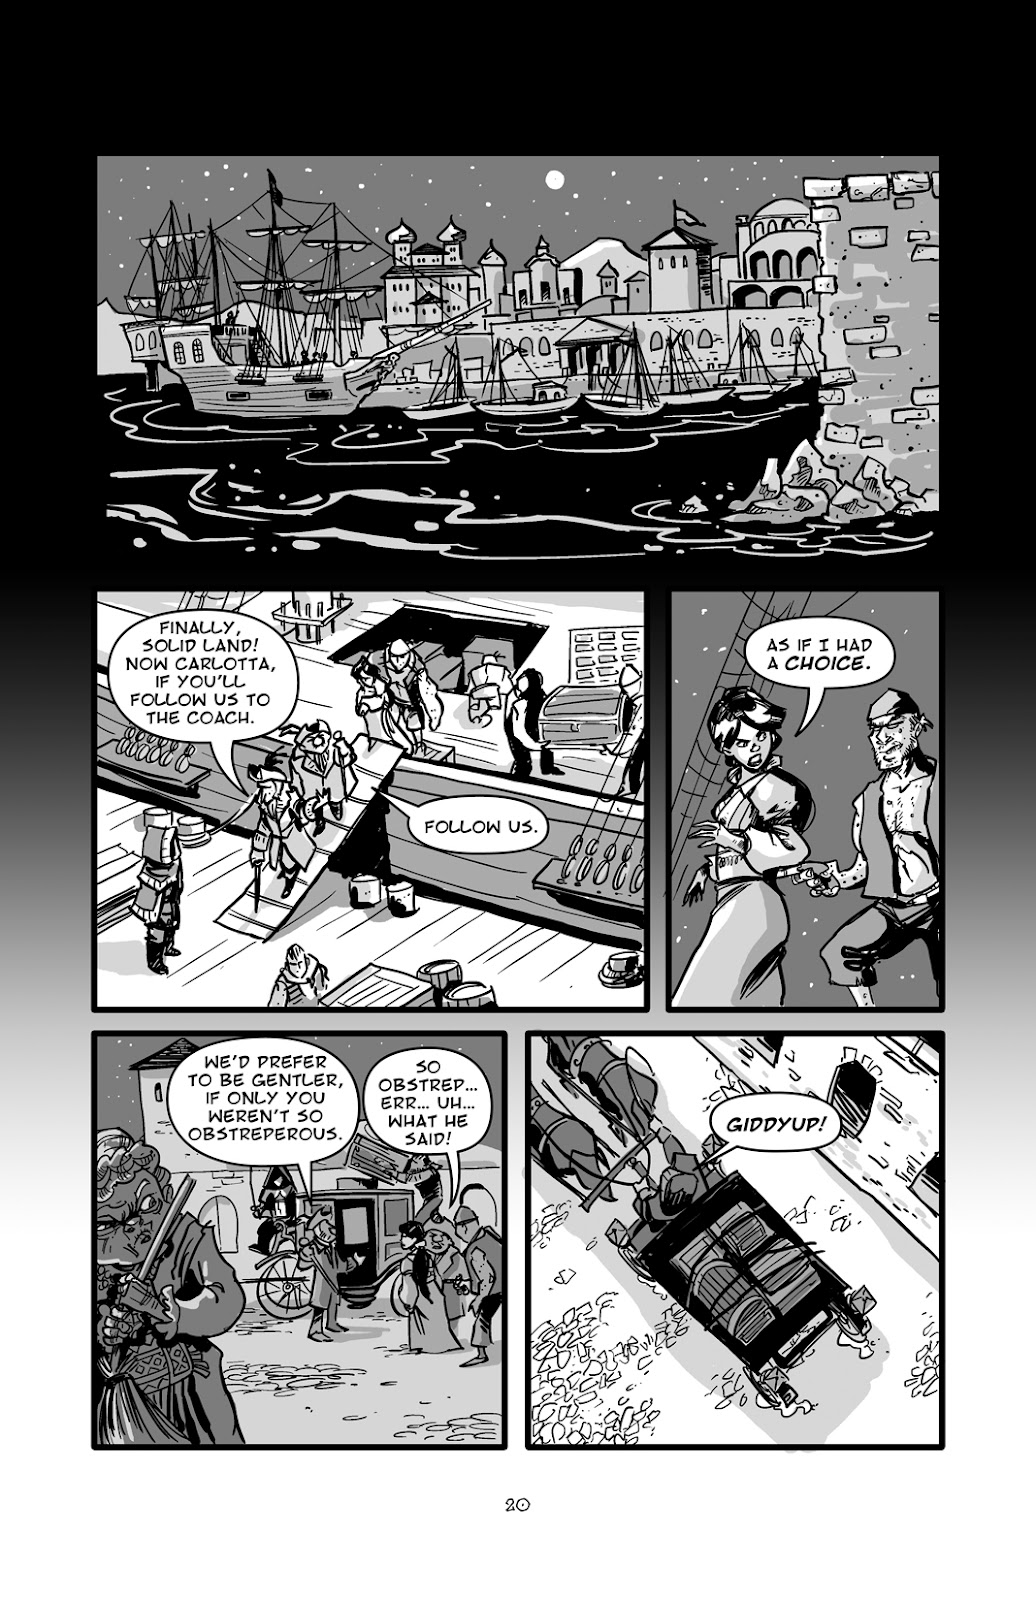 Pinocchio: Vampire Slayer - Of Wood and Blood issue 1 - Page 21